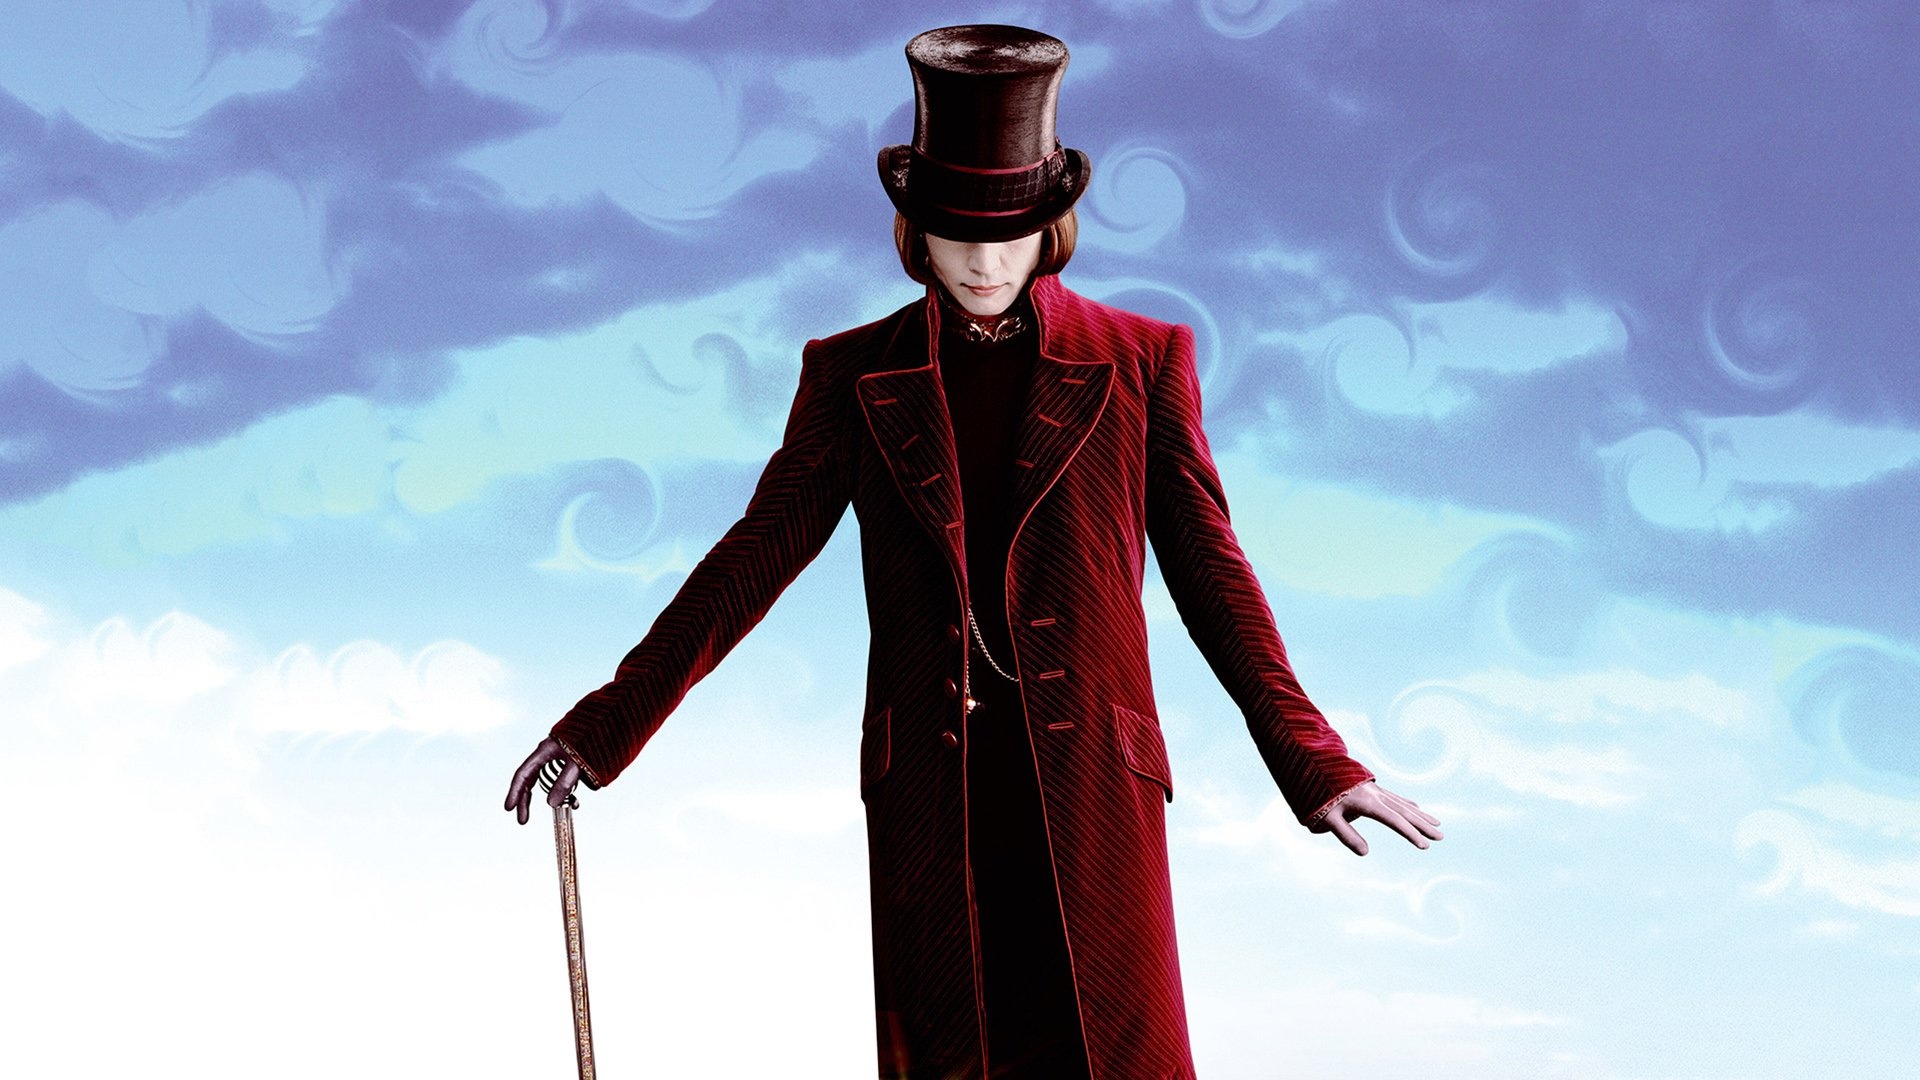 Willy Wonka, HD Wallpapers, Background images, 1920x1080 Full HD Desktop